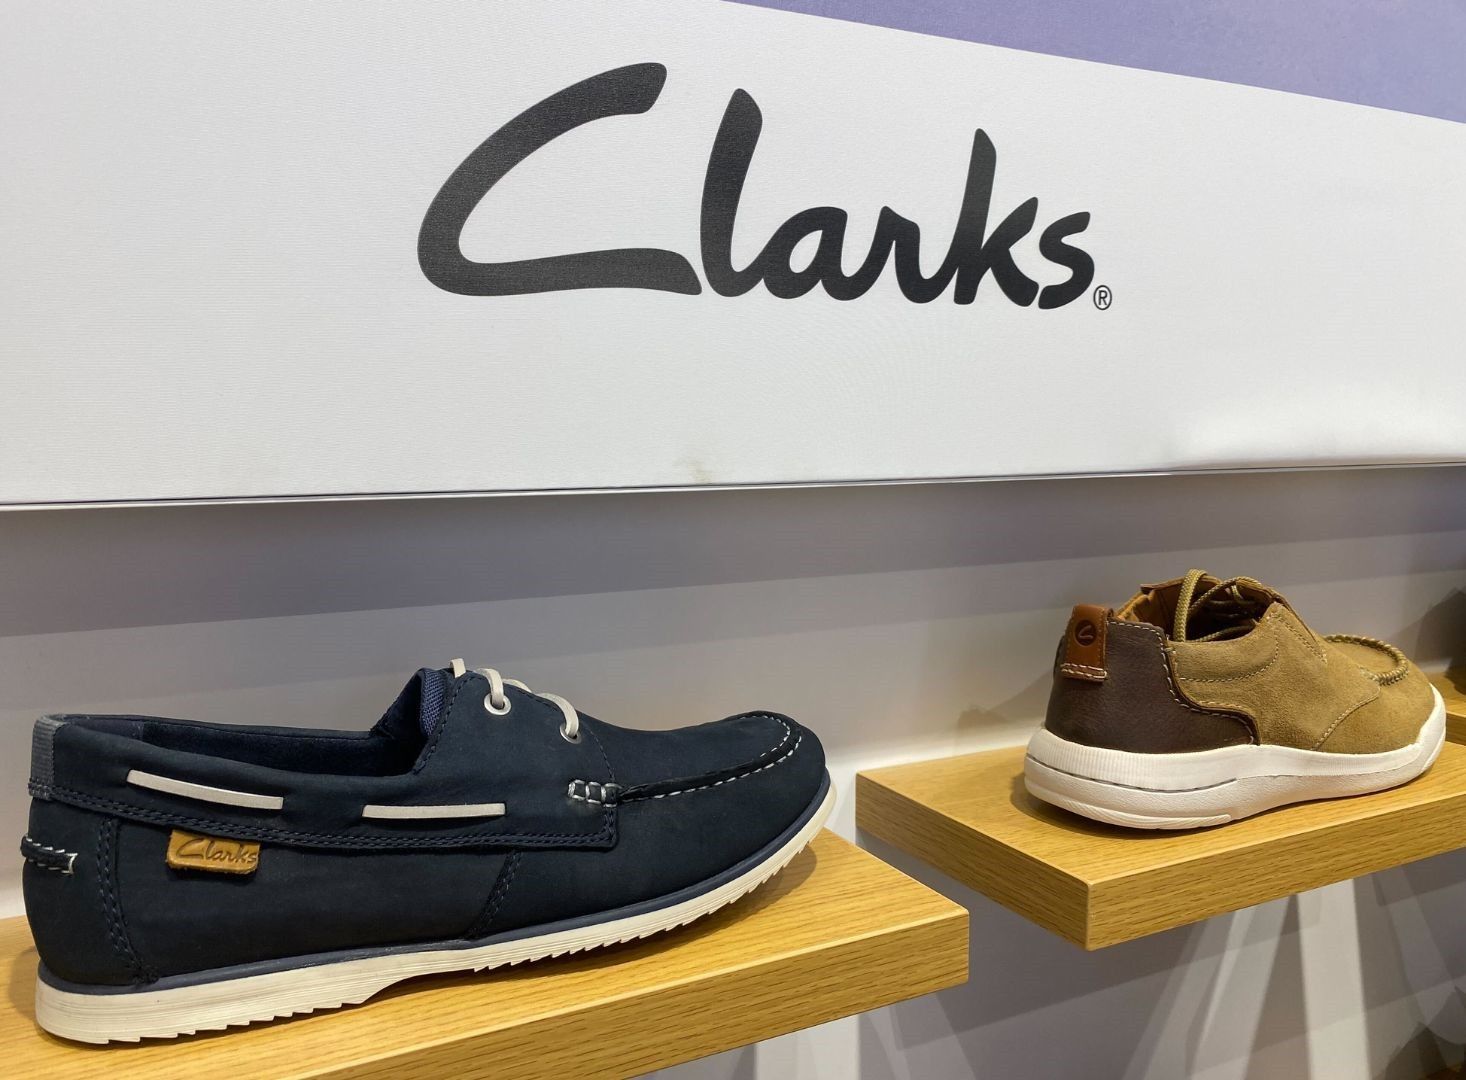 Clarks unveils summer and spring collection to beat the heat in style